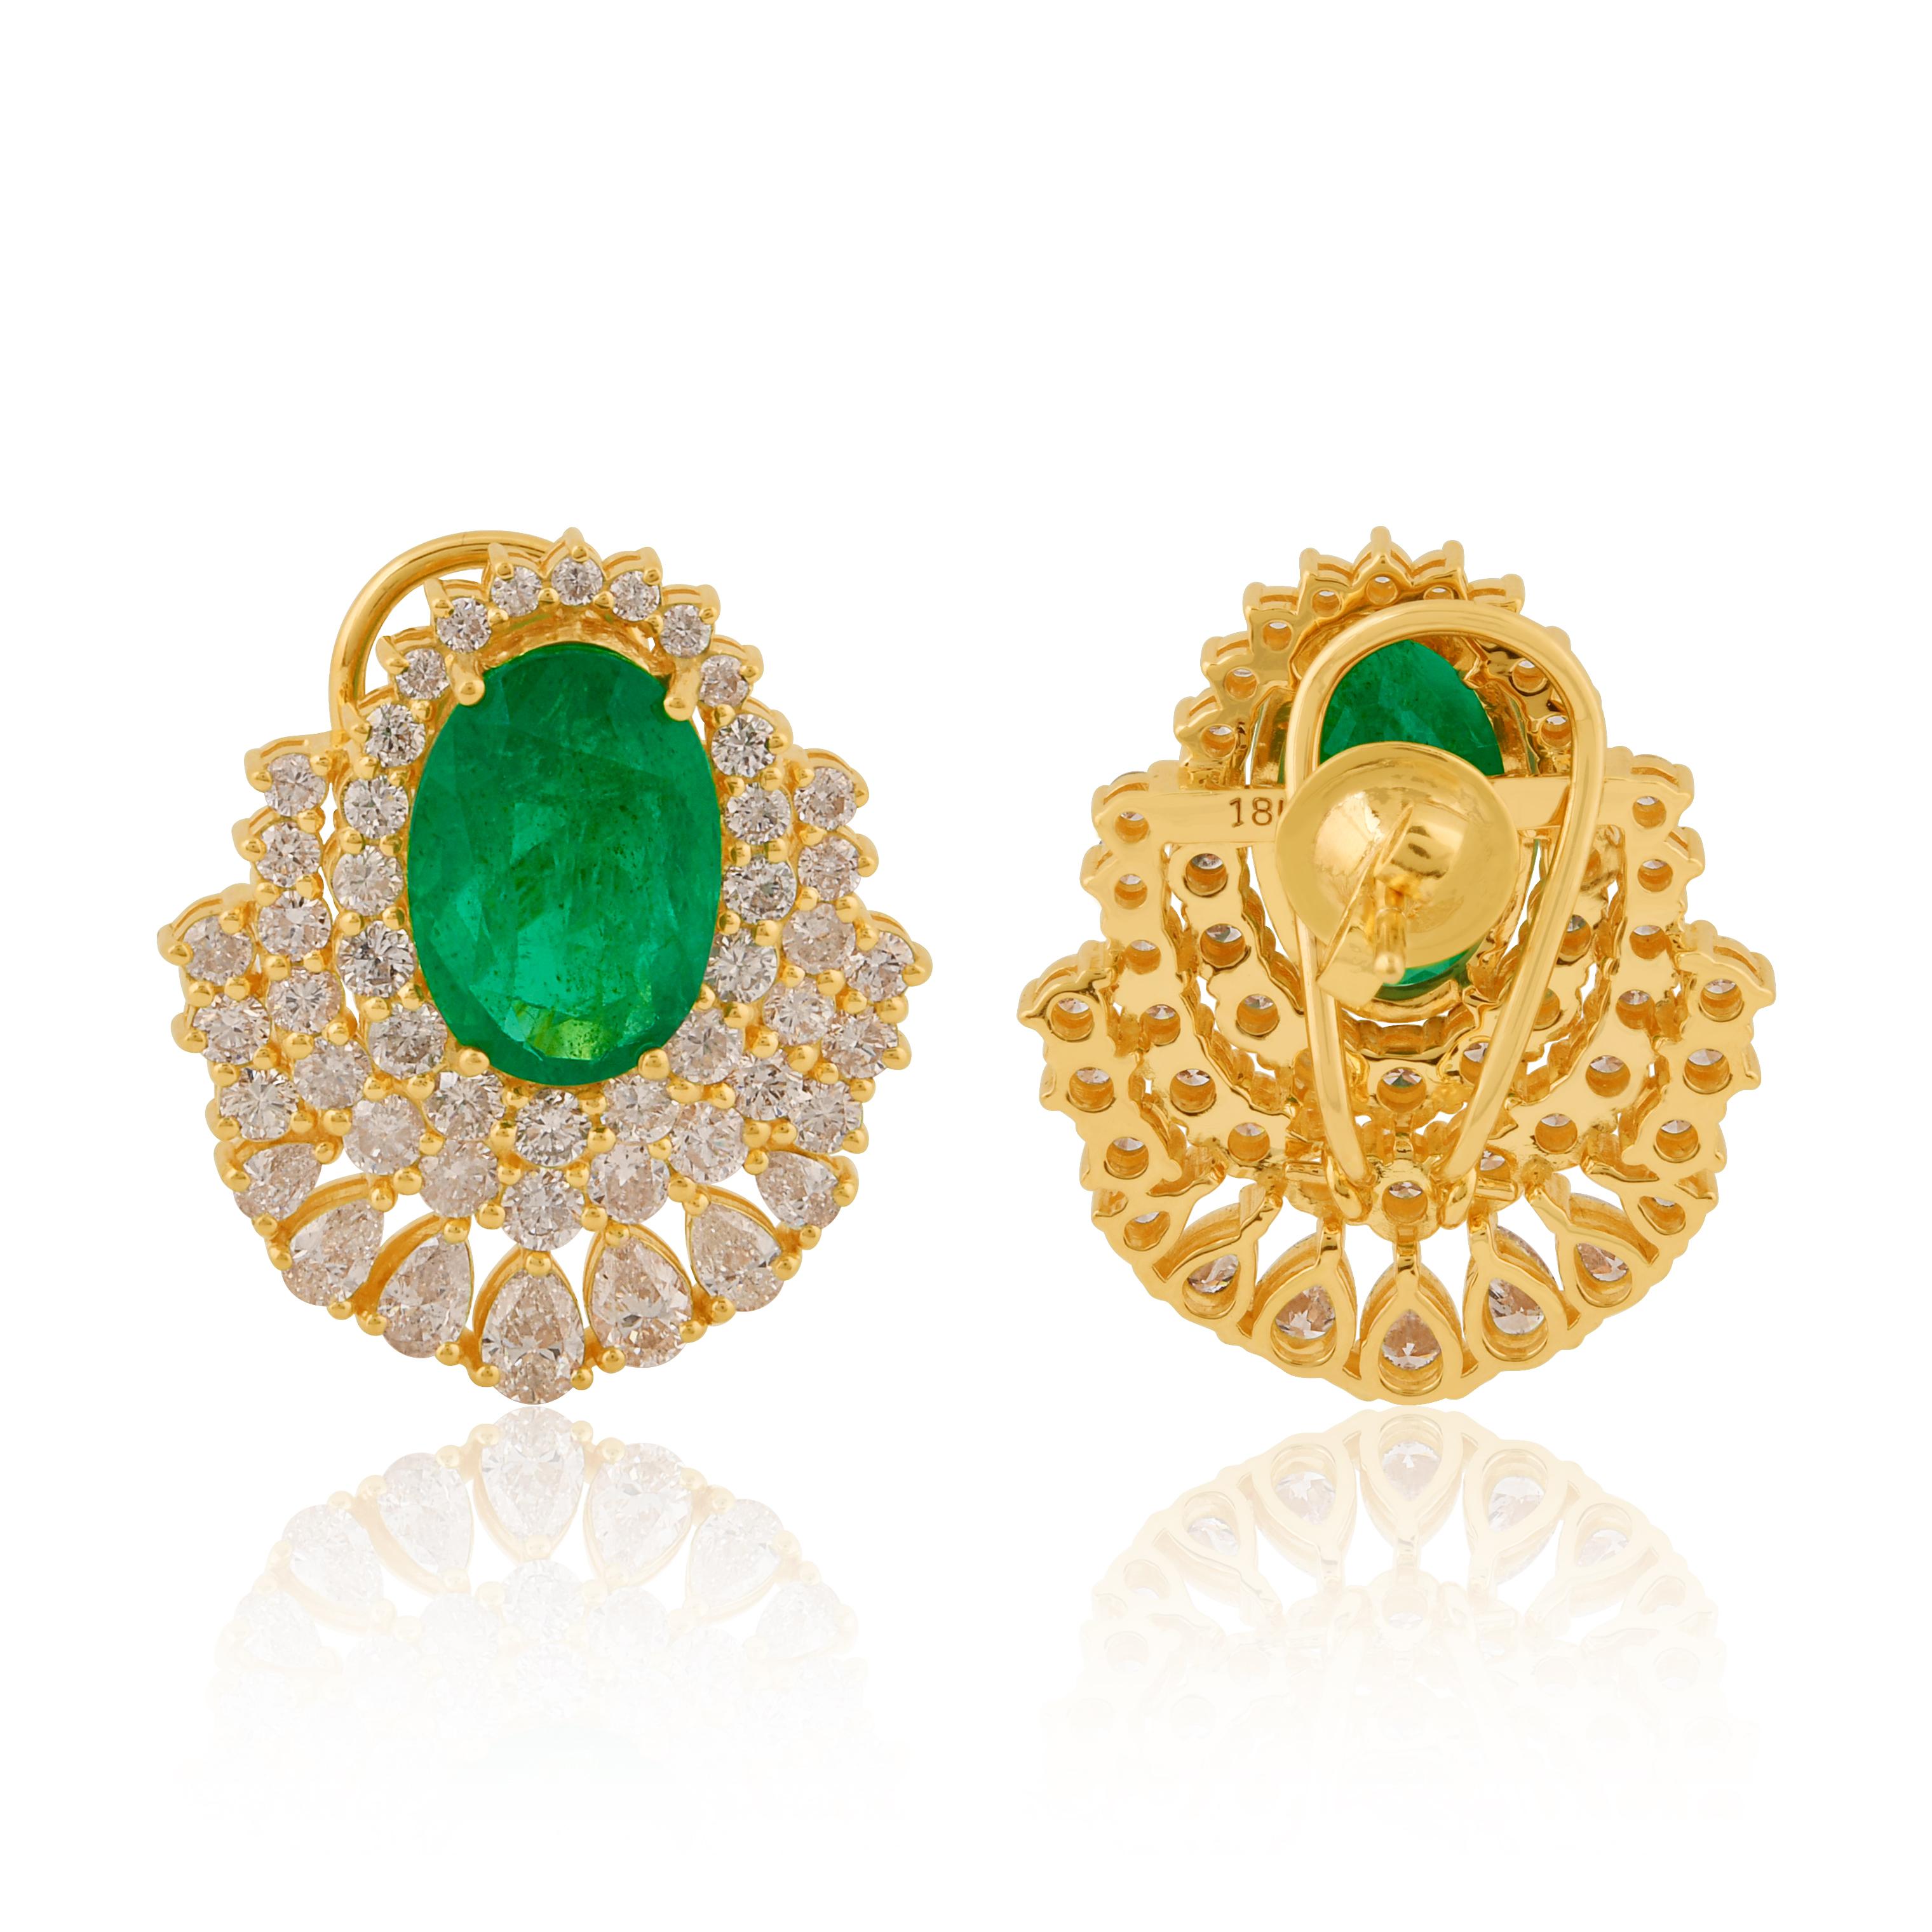 Item Code :- SEE-11879
Gross Wt :- 15.03 gm
14k Solid Yellow Gold Wt :- 12.59 gm
Natural Diamond Wt :- 4.46 ct  ( AVERAGE DIAMOND CLARITY SI1-SI2 & COLOR H-I )
Zambian Emerald Wt :- 7.73 ct
Earrings Size :- 22x21 mm approx.

✦